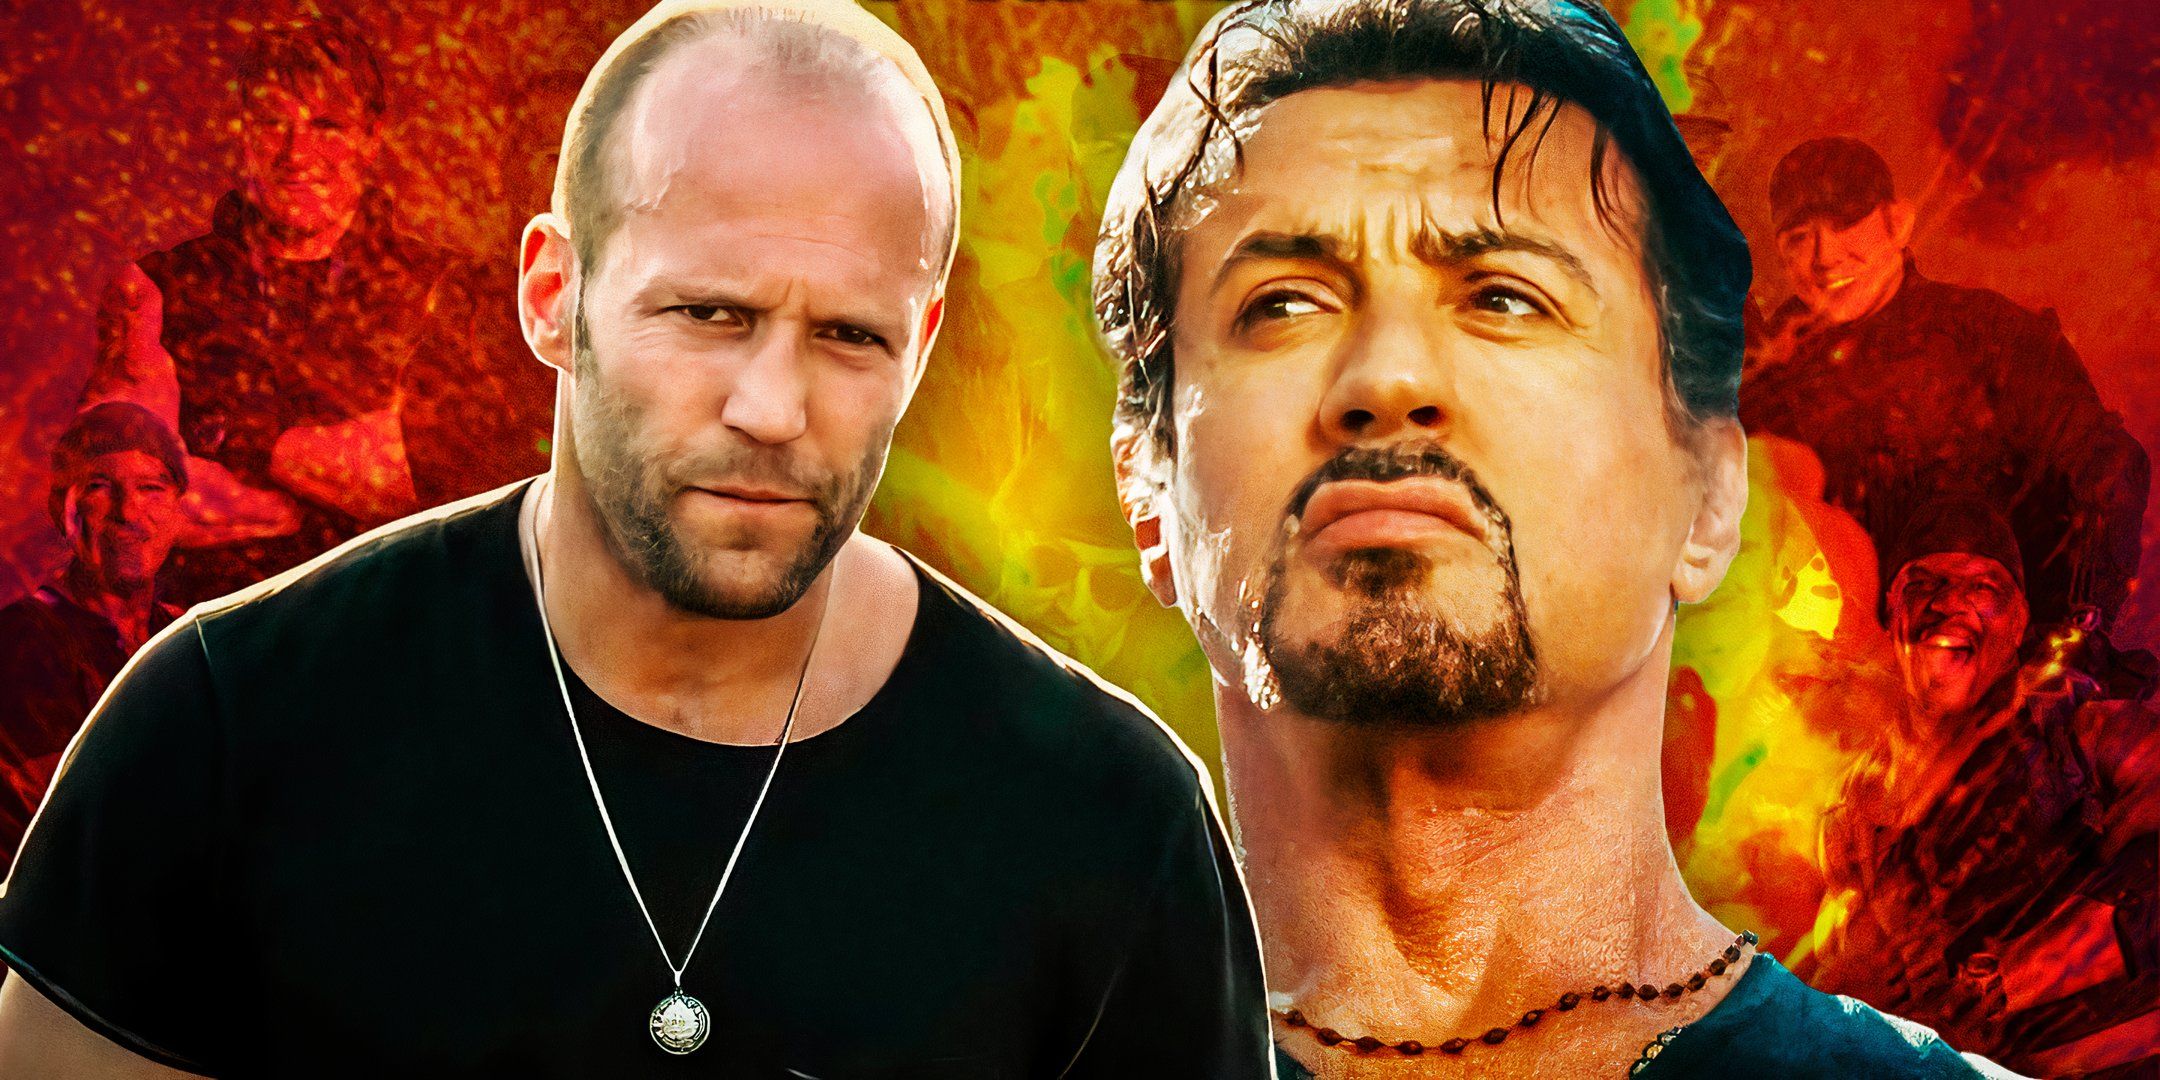 Sylvester Stallone as Barney Ross and Jason Statham as Lee Christmas from The Expendables franchise